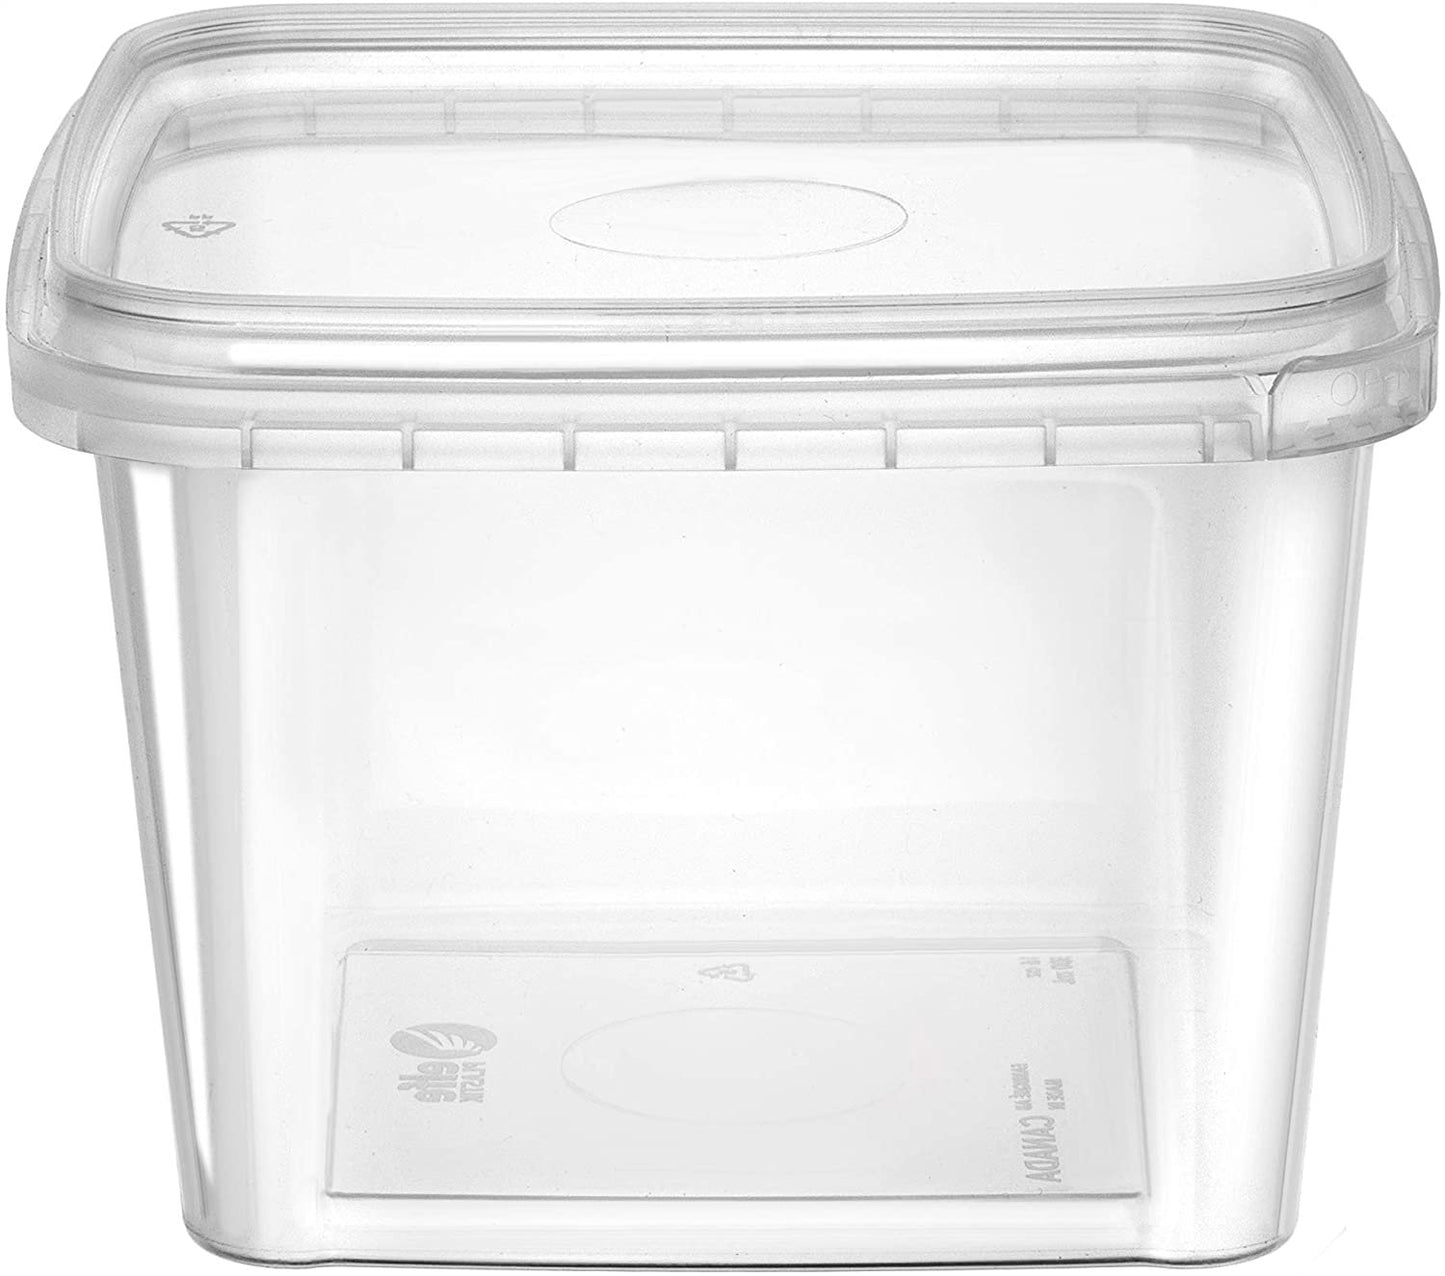 16-oz. Square Clear Deli Containers with Lids | Stackable, Tamper-Proof BPA-Free Food Storage Containers | Recyclable Space Saver Airtight Container for Kitchen Storage, Meal Prep, Take Out | 20 Pack - NY-HI